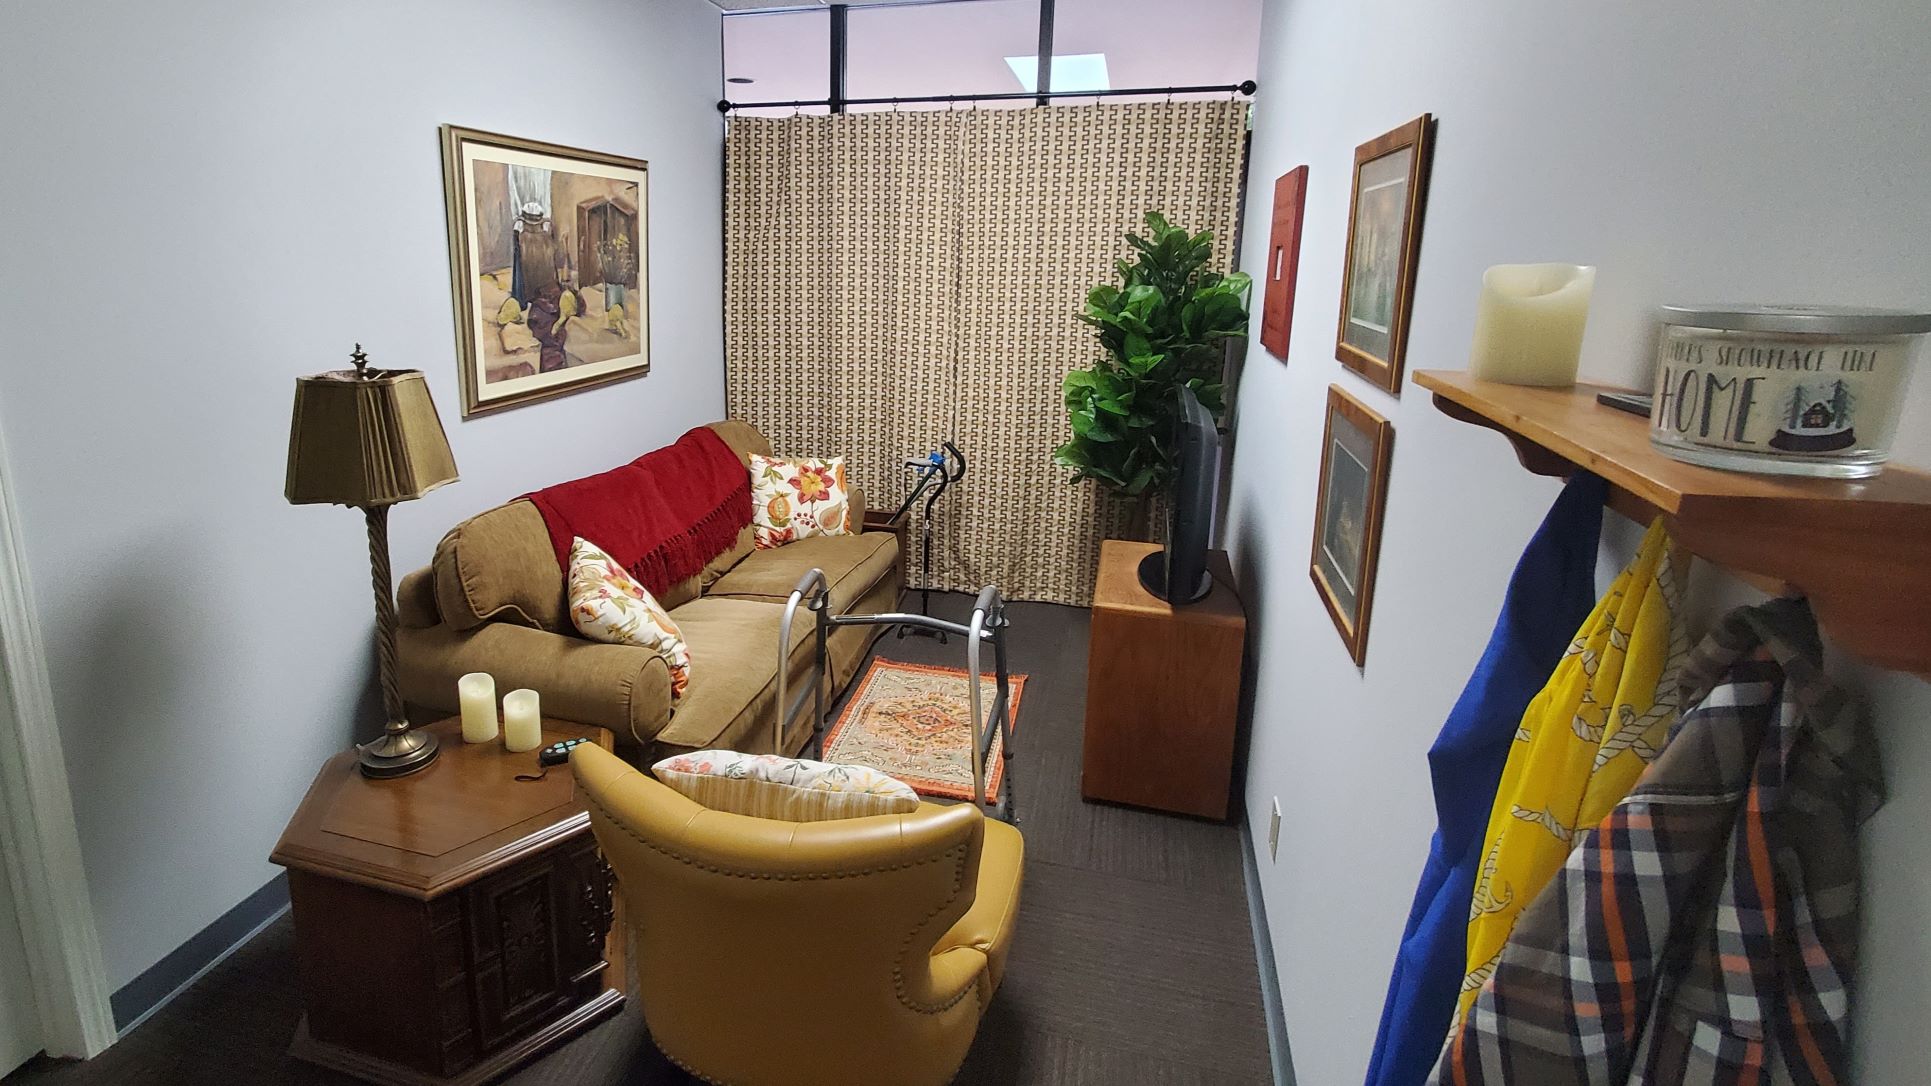 The living room provides caregivers challenges they may face and the opportunity to practice care techniques in a senior's home.